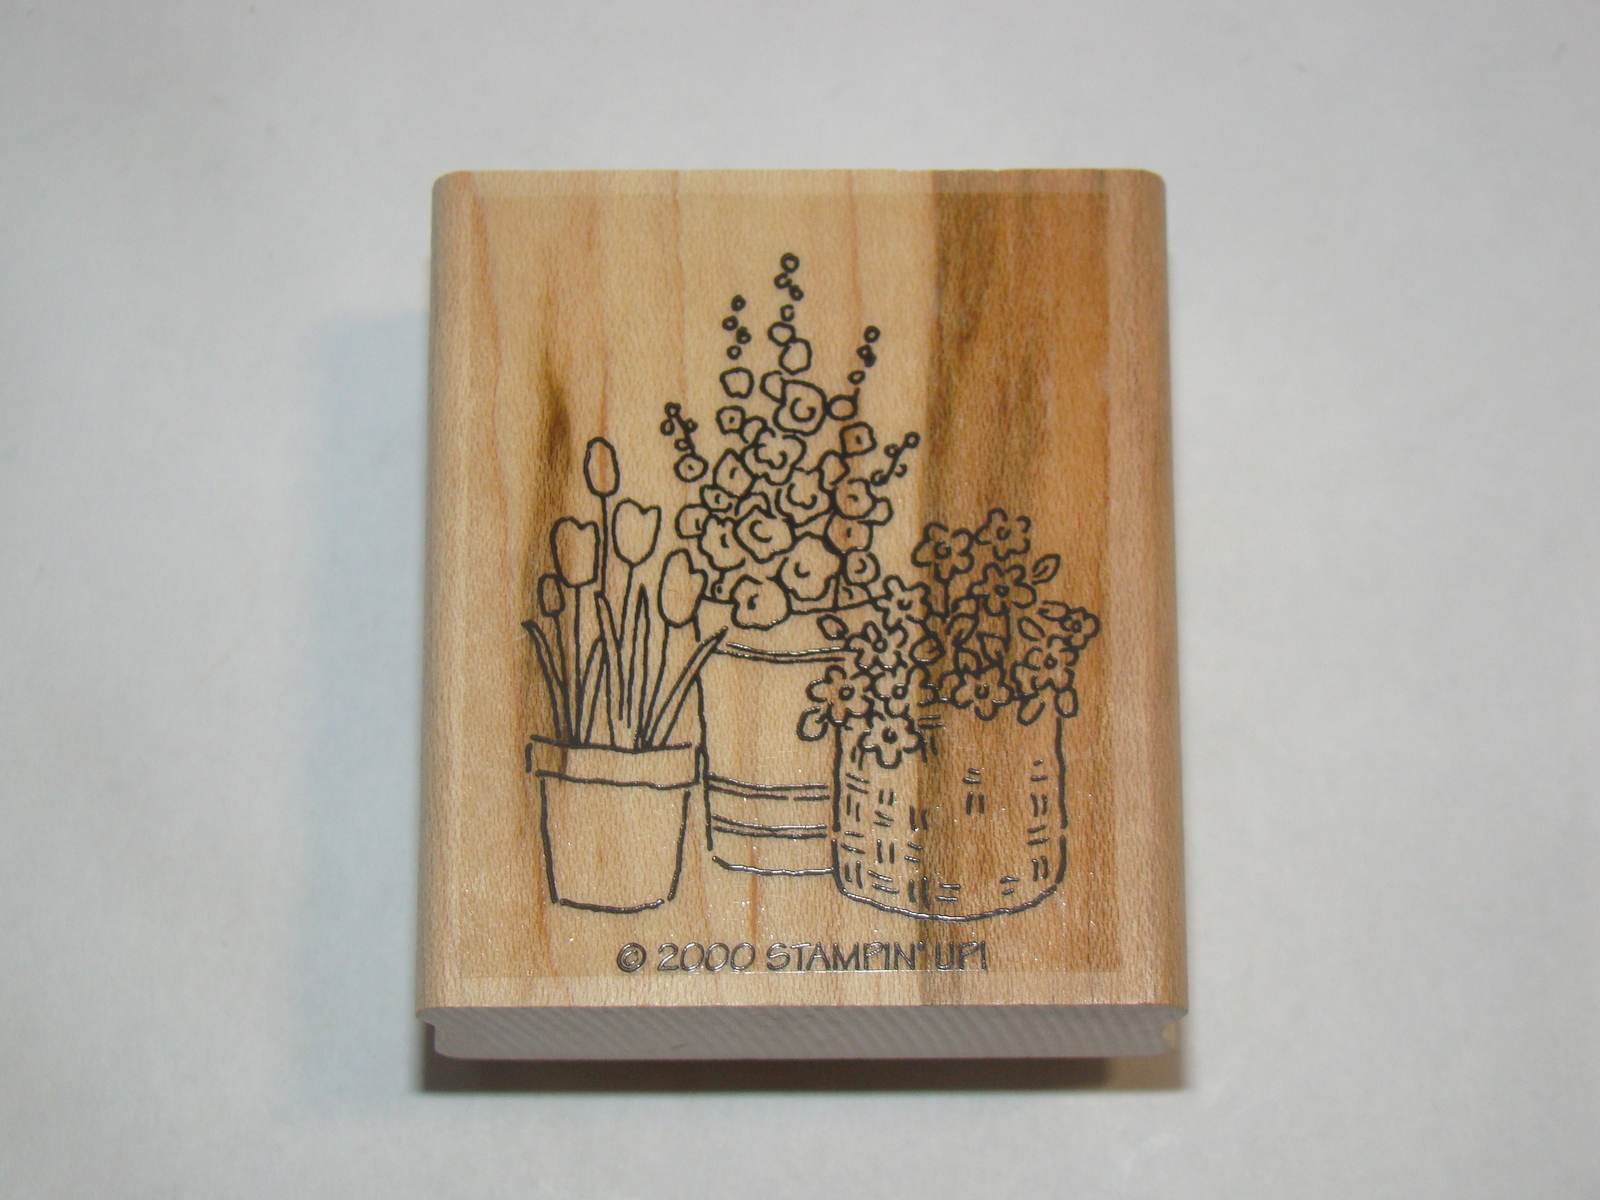 Primary image for 2000 STAMPIN' UP - FRIENDSHIP GARDENS (stamp)